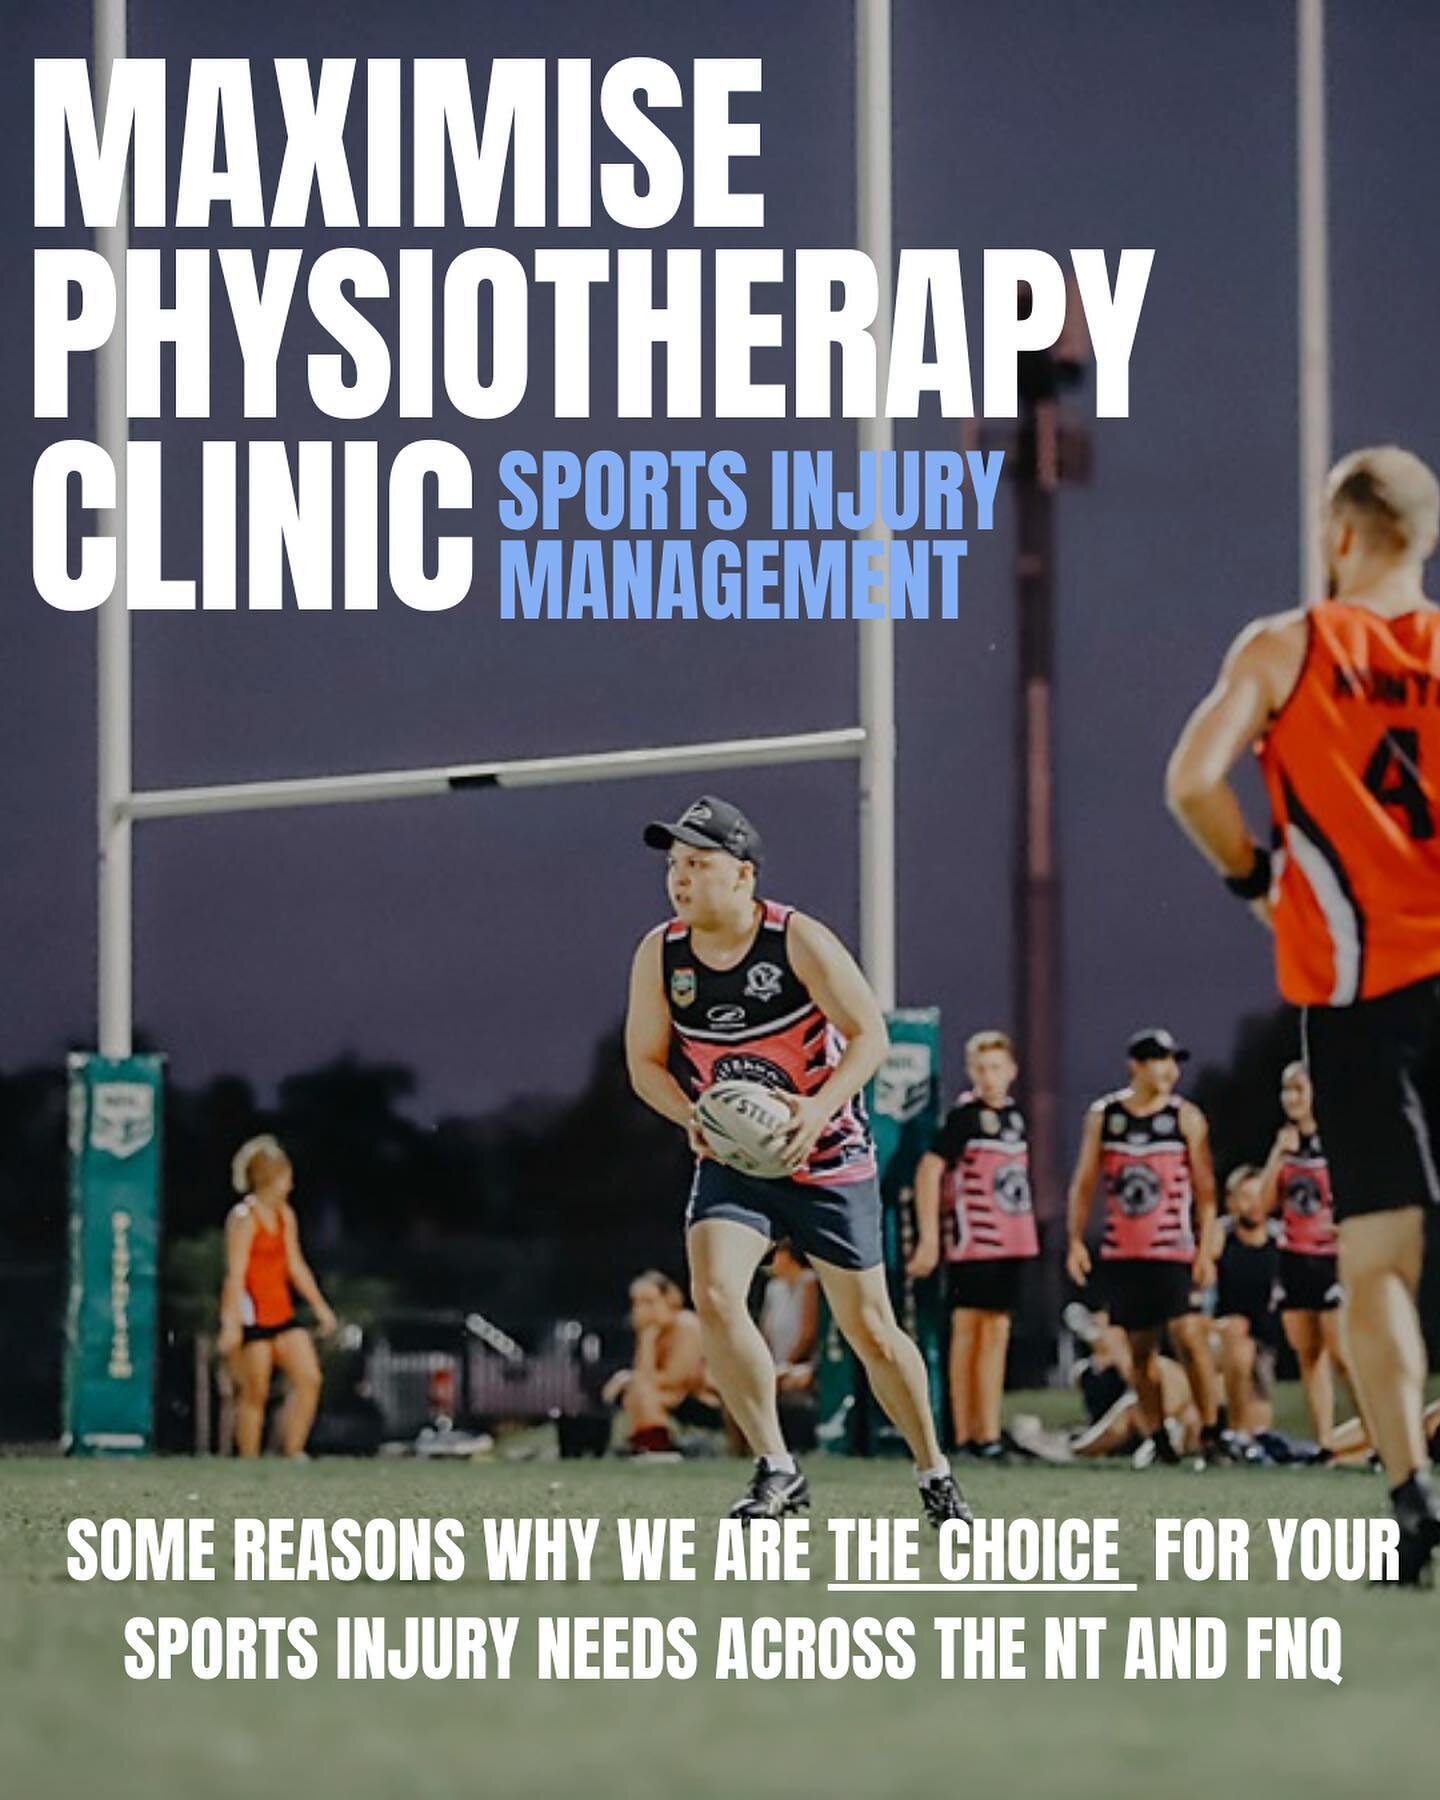 Our regular instagram posts are only a snapshot of what we practice here at Maximise 

For a truly comprehensive sport injury and prevention service speak to us today!

#physio #sportsinjury #sportsinjuryrehab #injuryprevention #injurypreventiontrain